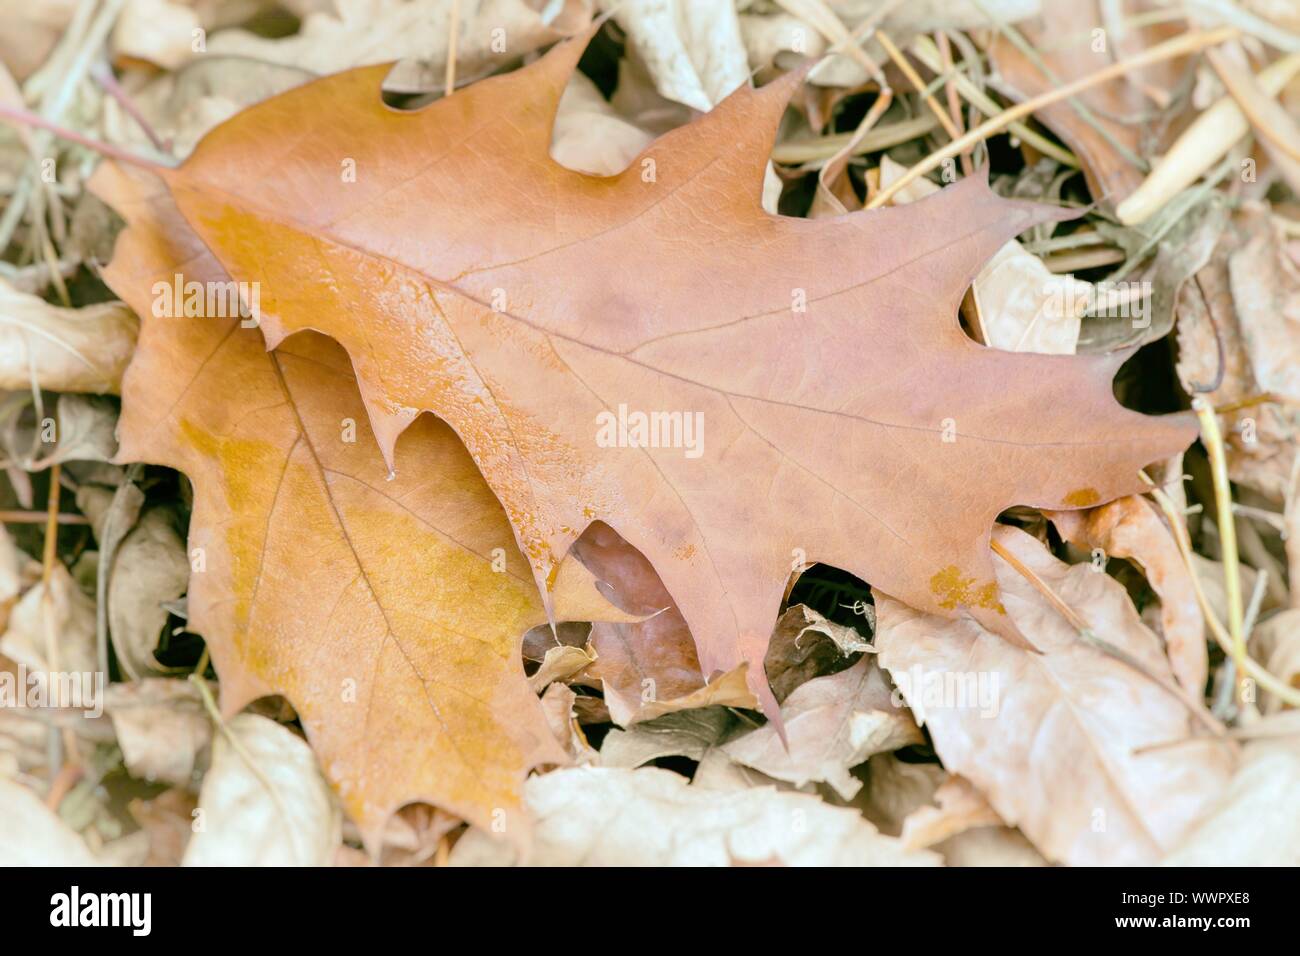 Fallen yellow oak leaves on the background of fallen leaves on the ground. Stock Photo